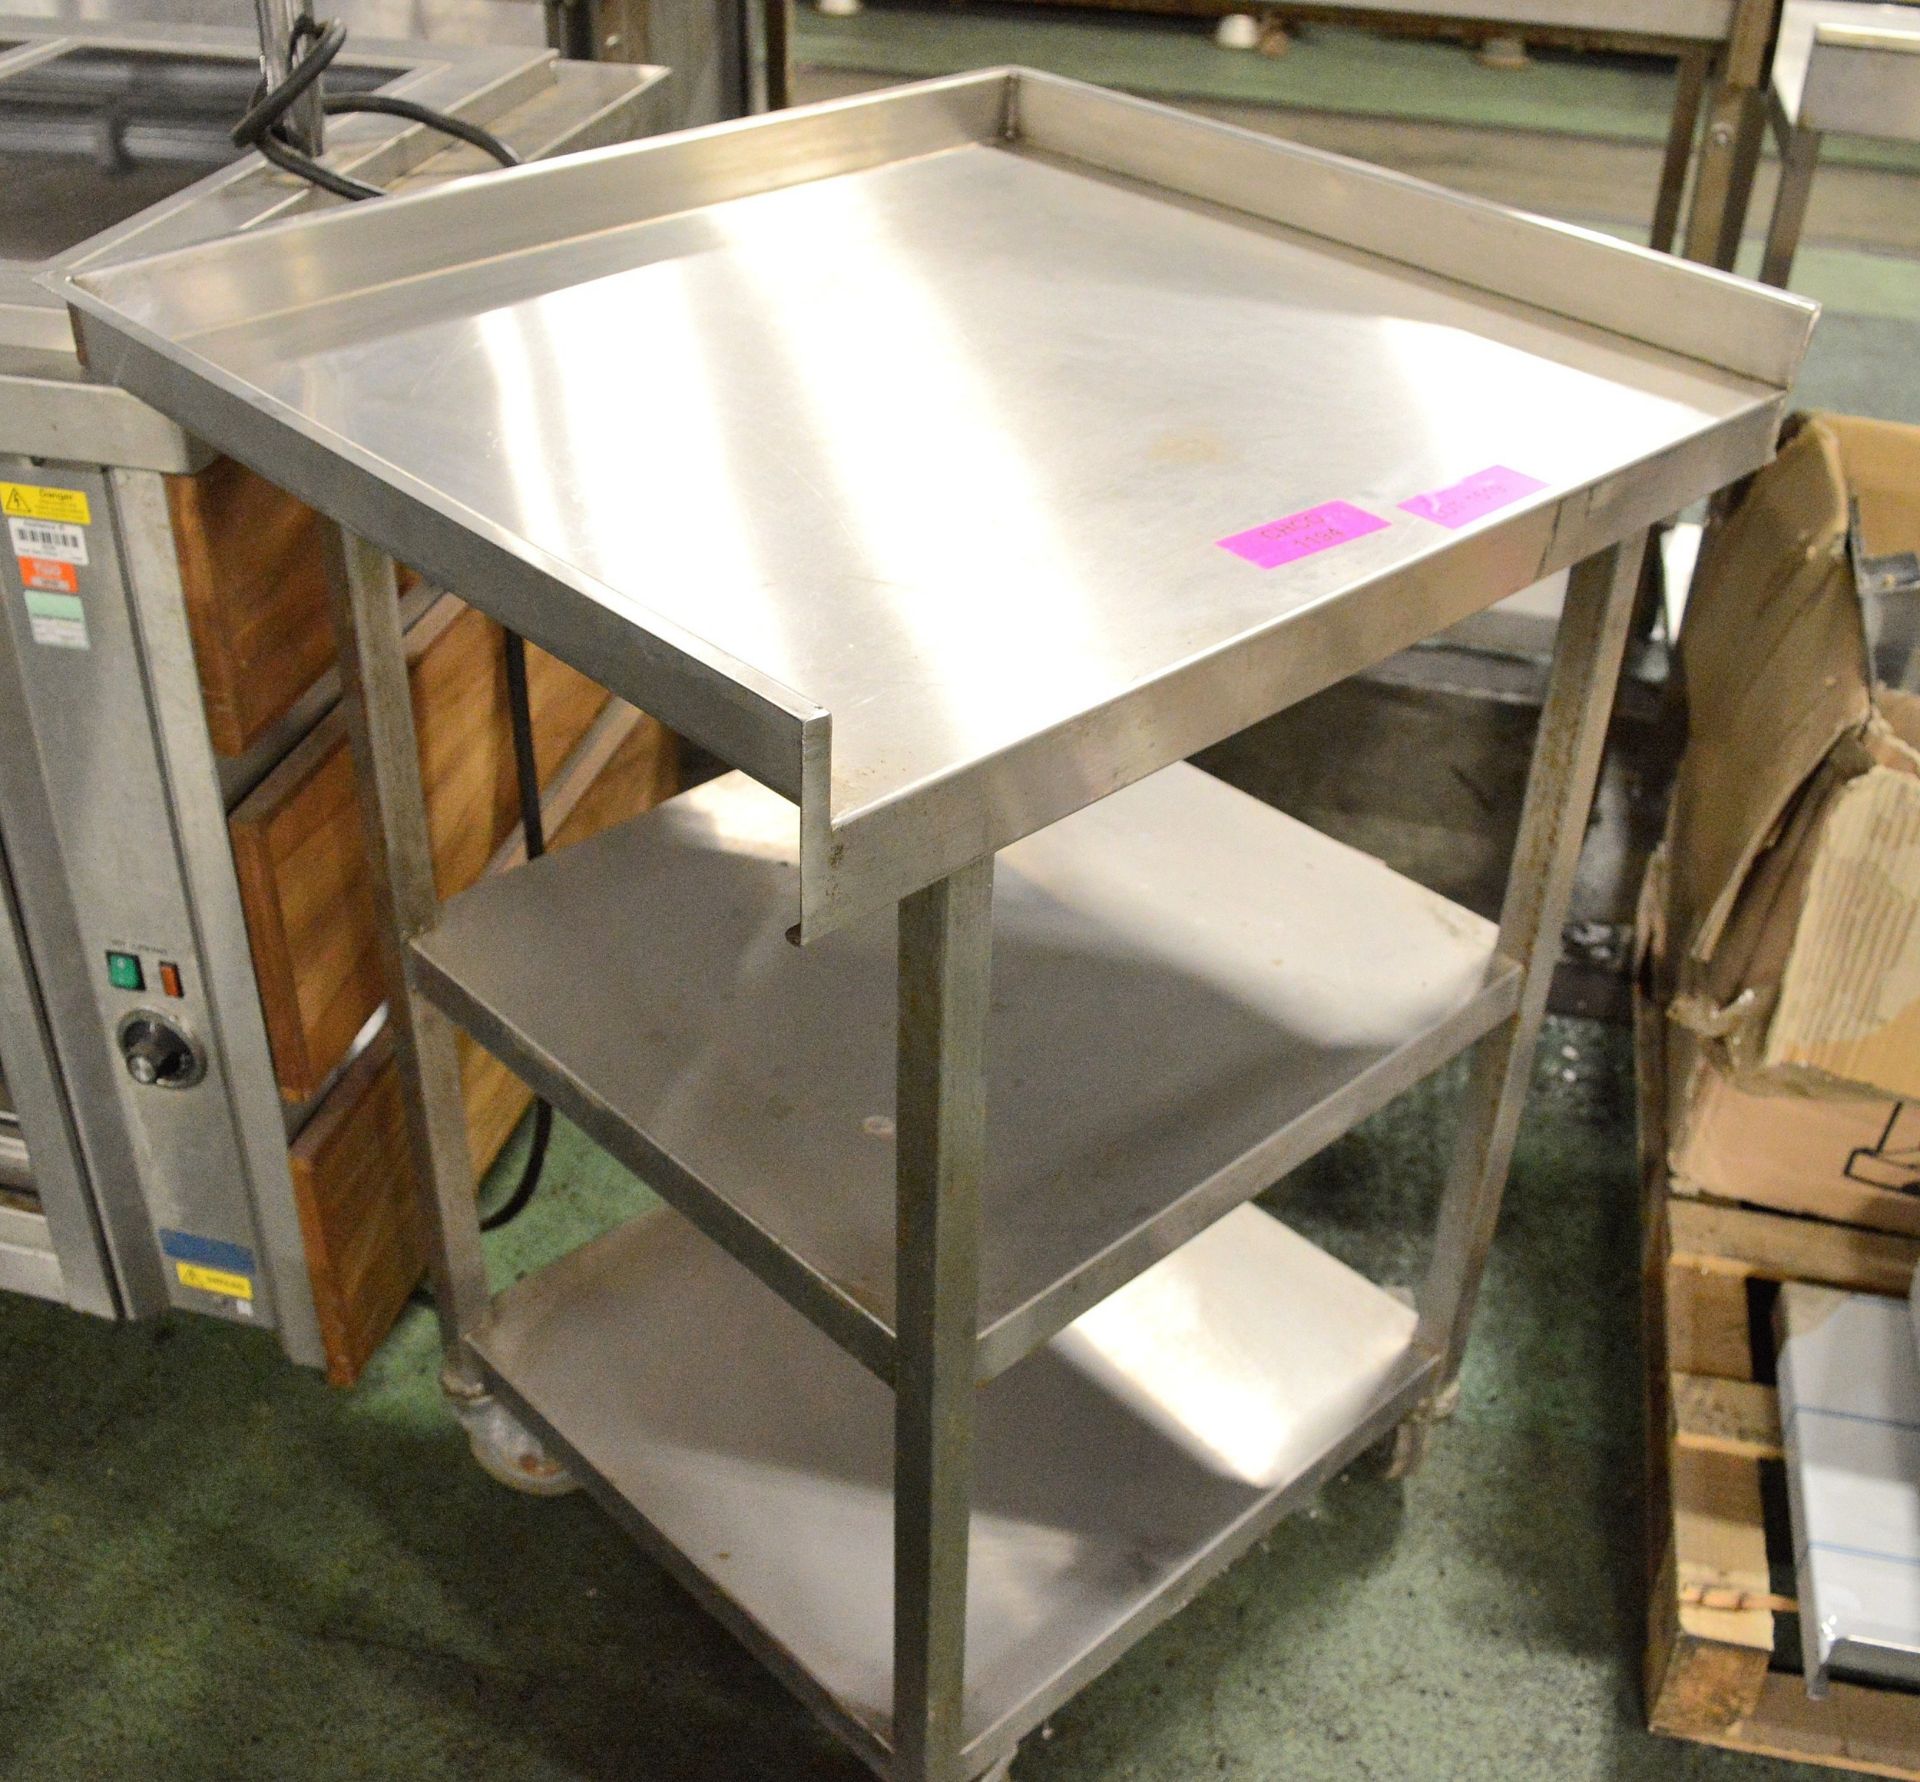 Stainless table - 750 x 650 - Image 2 of 2